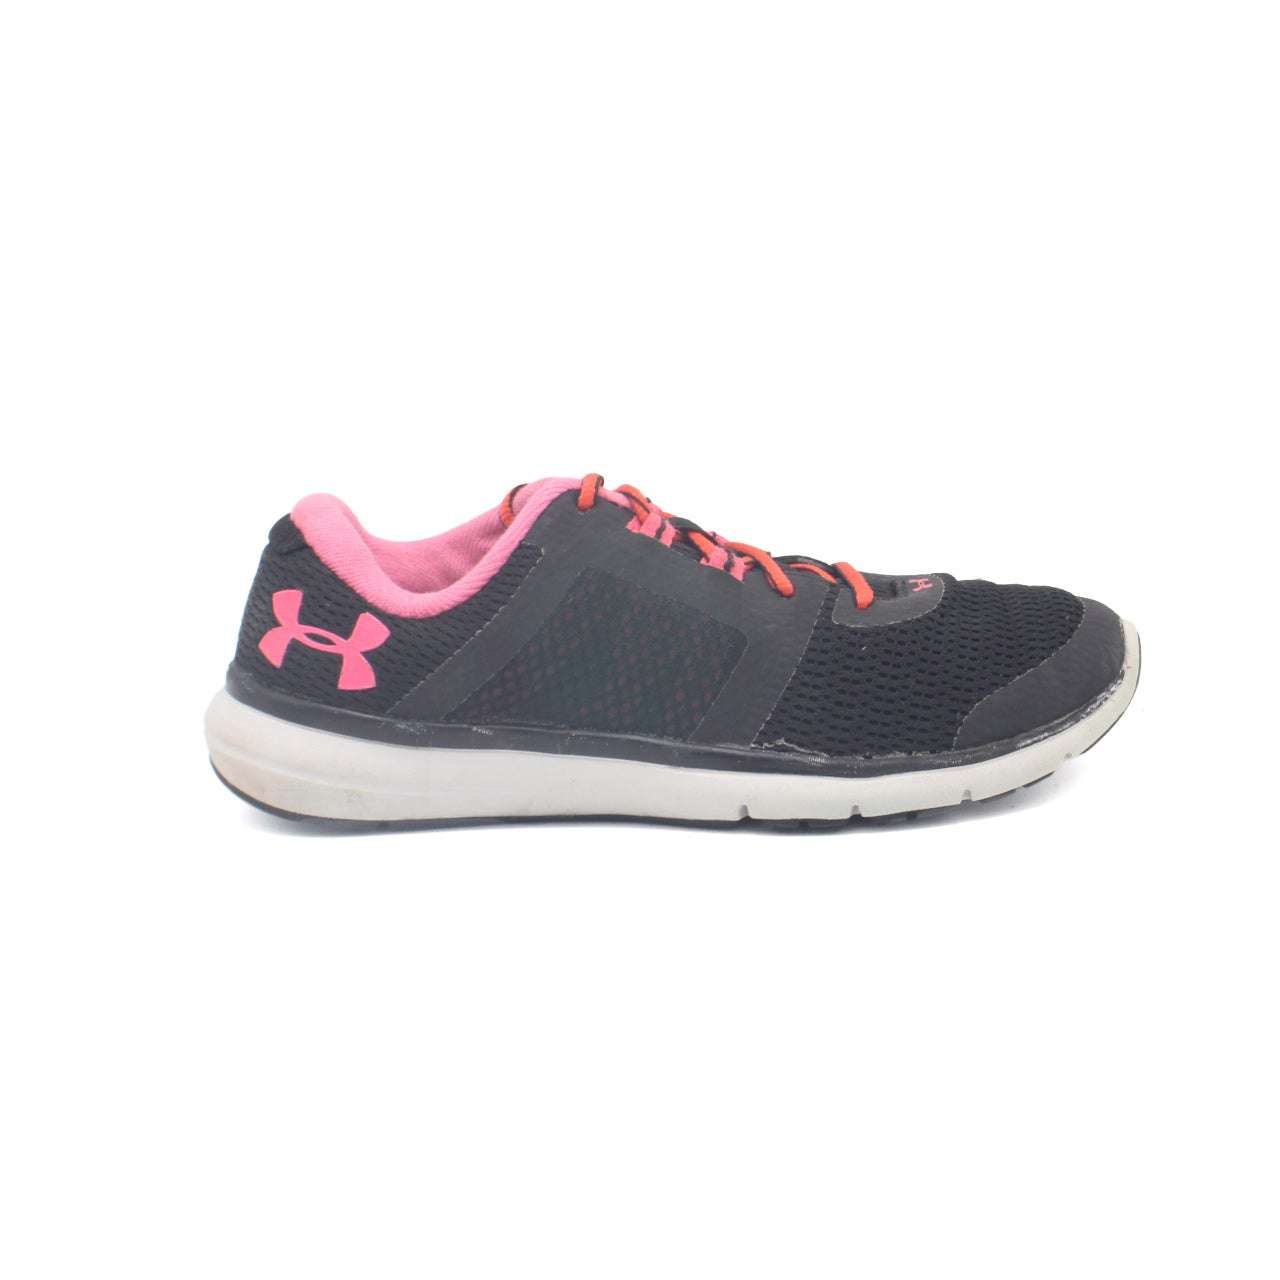 UNDER ARMOUR FUSE FST WIDE